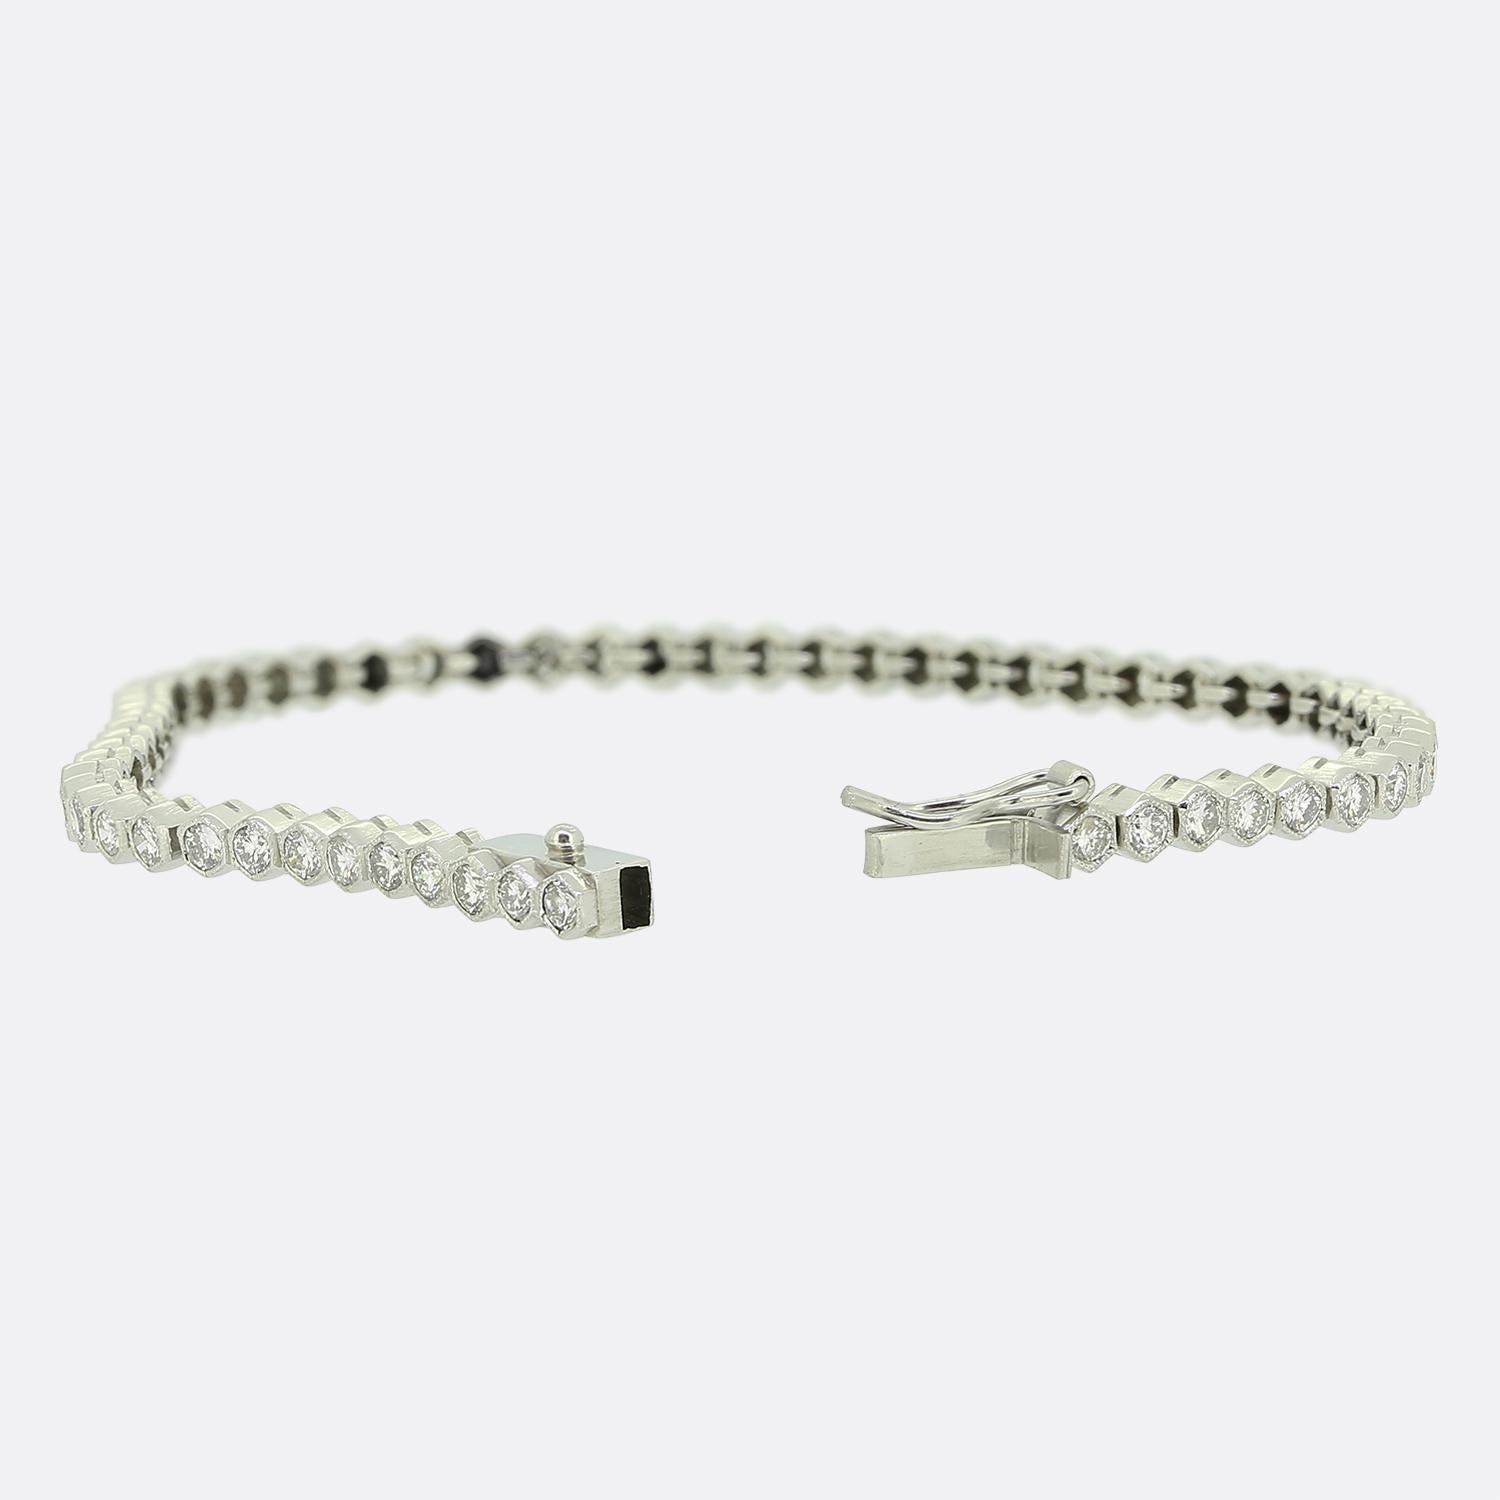 Here we have a delightful diamond set line bracelet. This vintage piece has been crafted from platinum and showcases 59 round brilliant cut diamonds; each of which sits individually in a hexagonally shaped milgrain setting. All stones here are